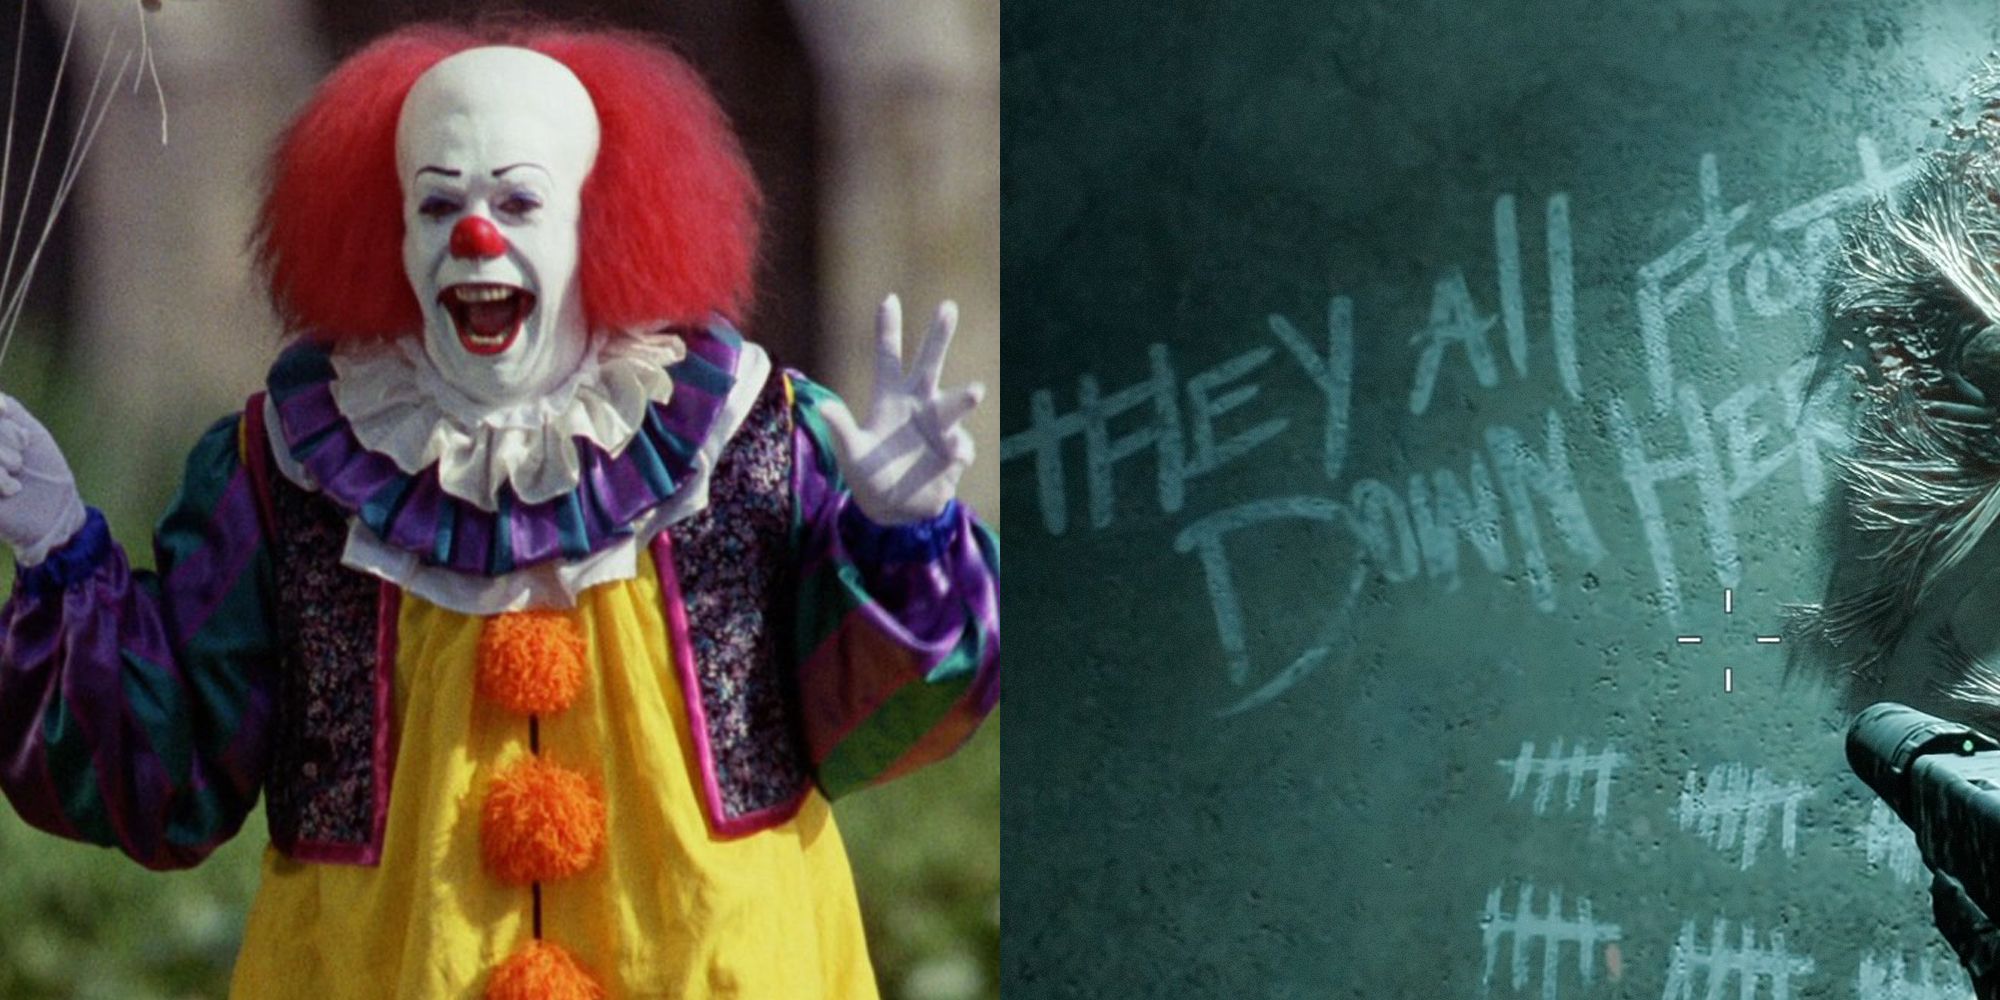 Split image with two photos. The left is Pennywise from the It mini-series. The right is a wall from Back 4 Blood with "They all float down here" written on it.